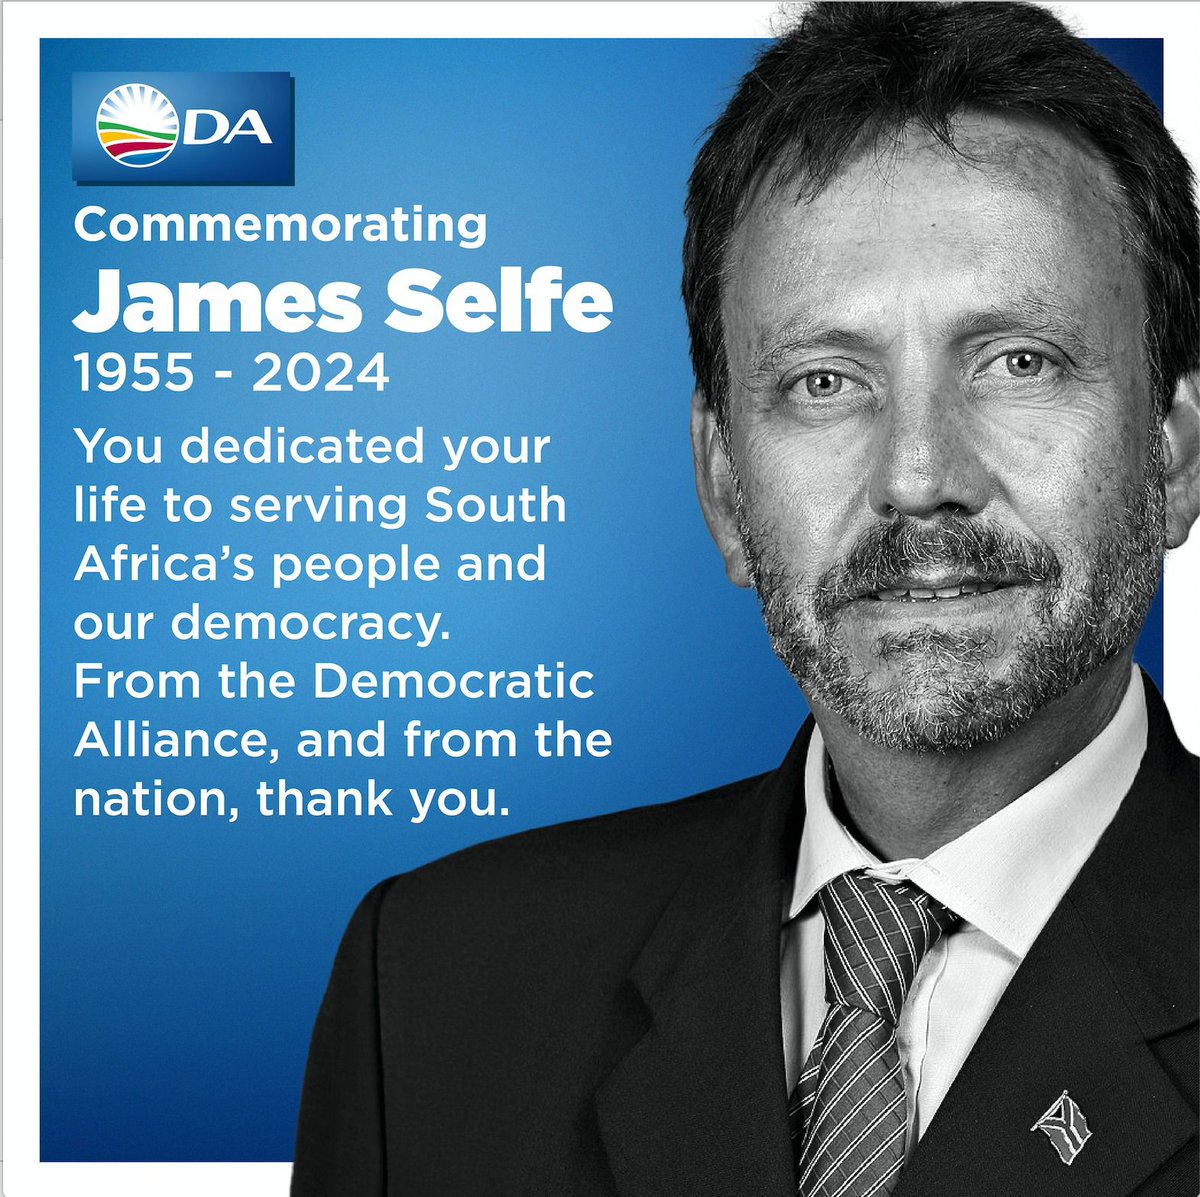 James Selfe but he is one of the people has had a big impact on our constitutional democracy. For the next generation of leaders in the country we owe him a huge debt. May you rest in peace knowing that your struggle will be carried forward by those that you mentored.